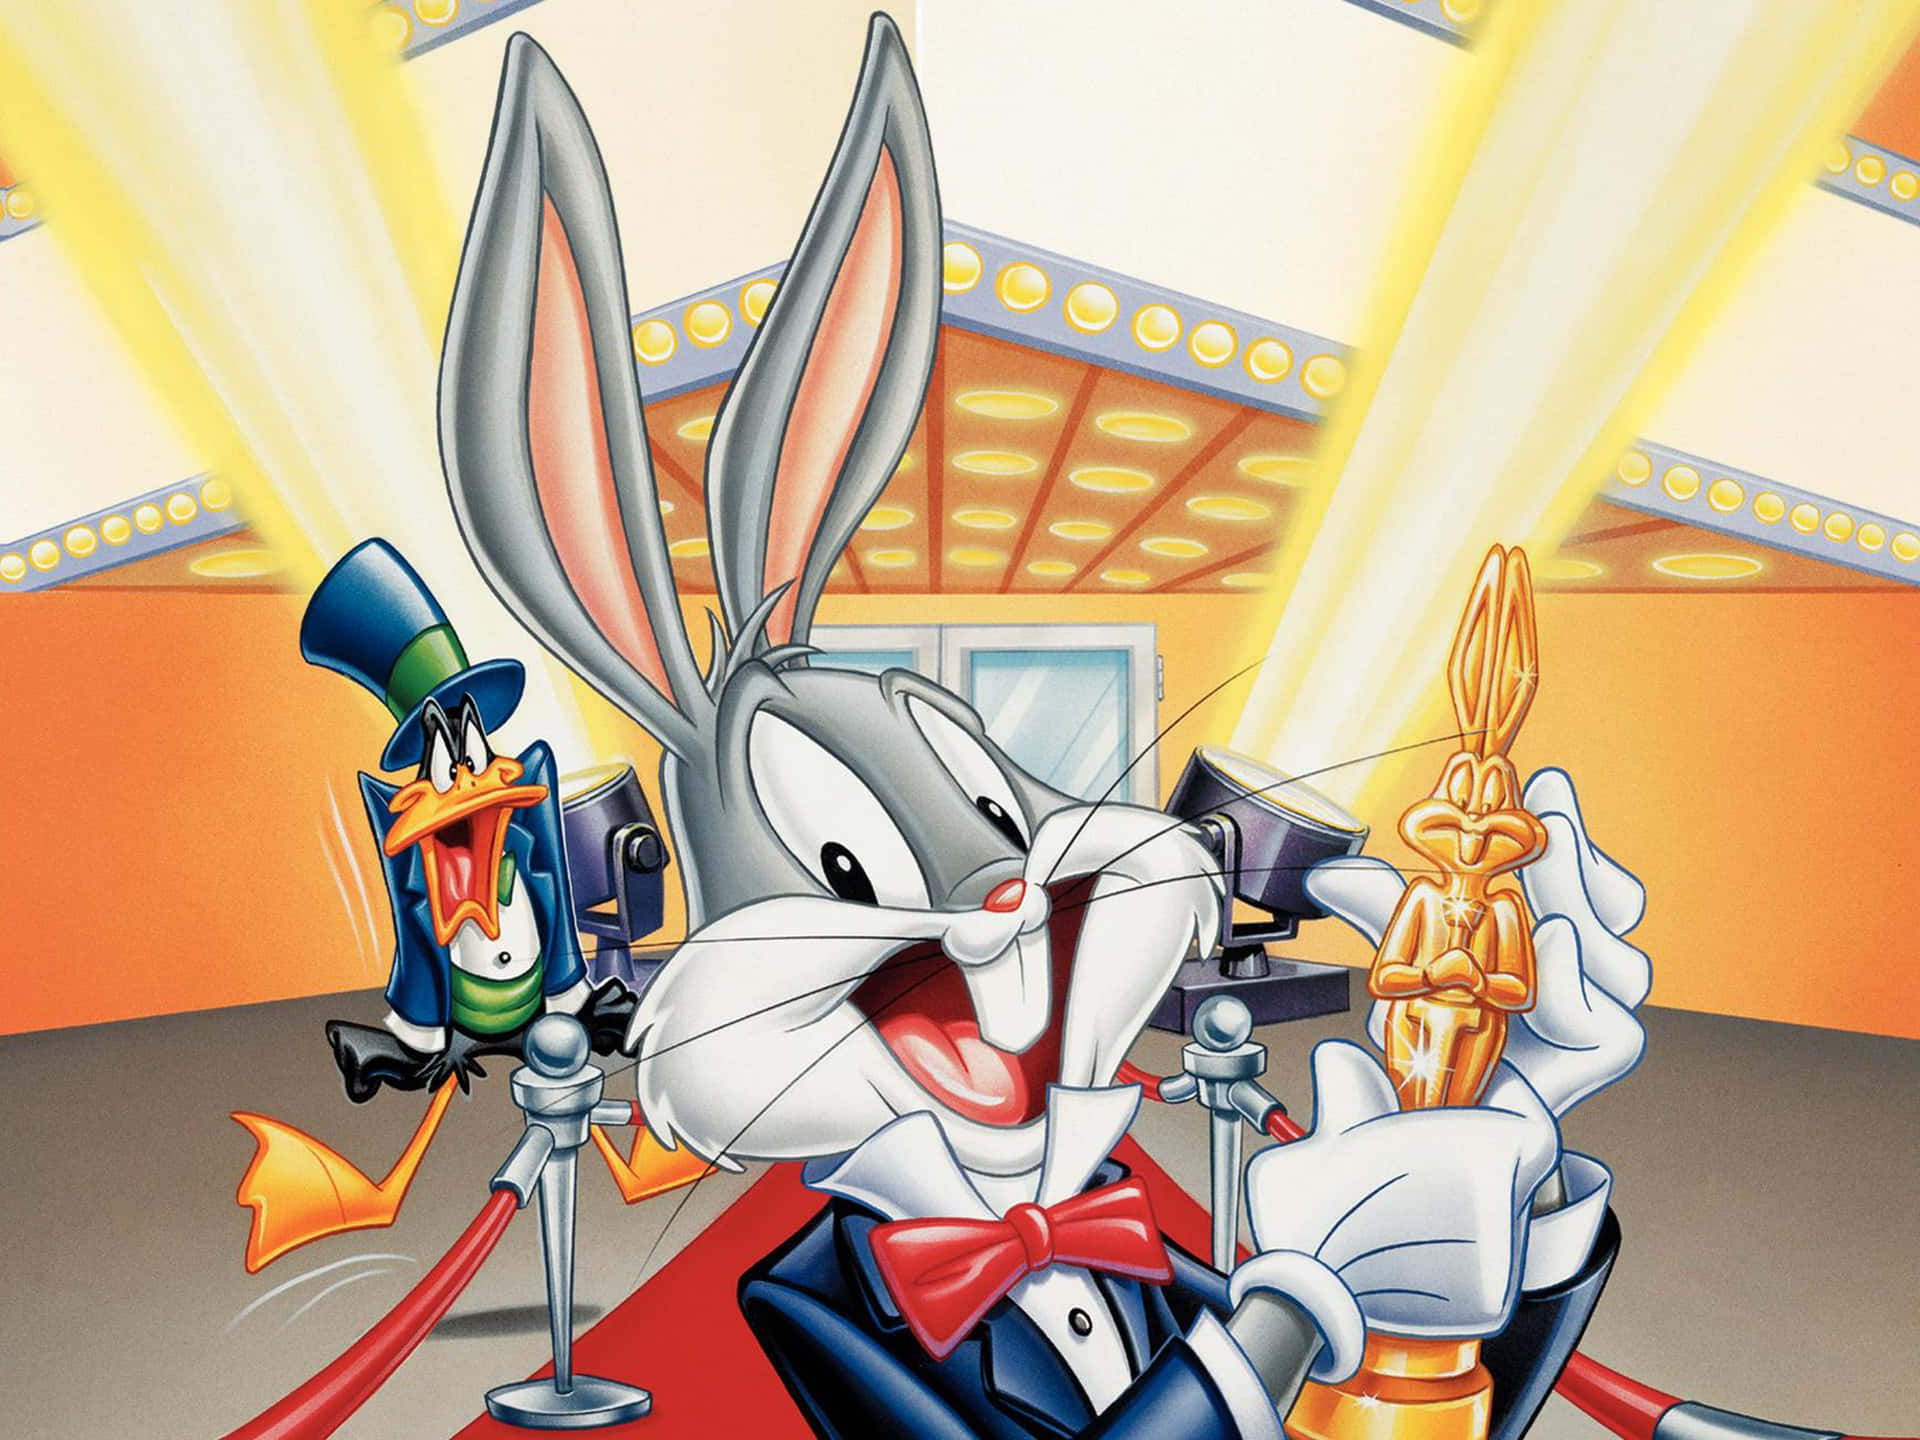 Cool Bugs Bunny modtager trofæ Wallpaper